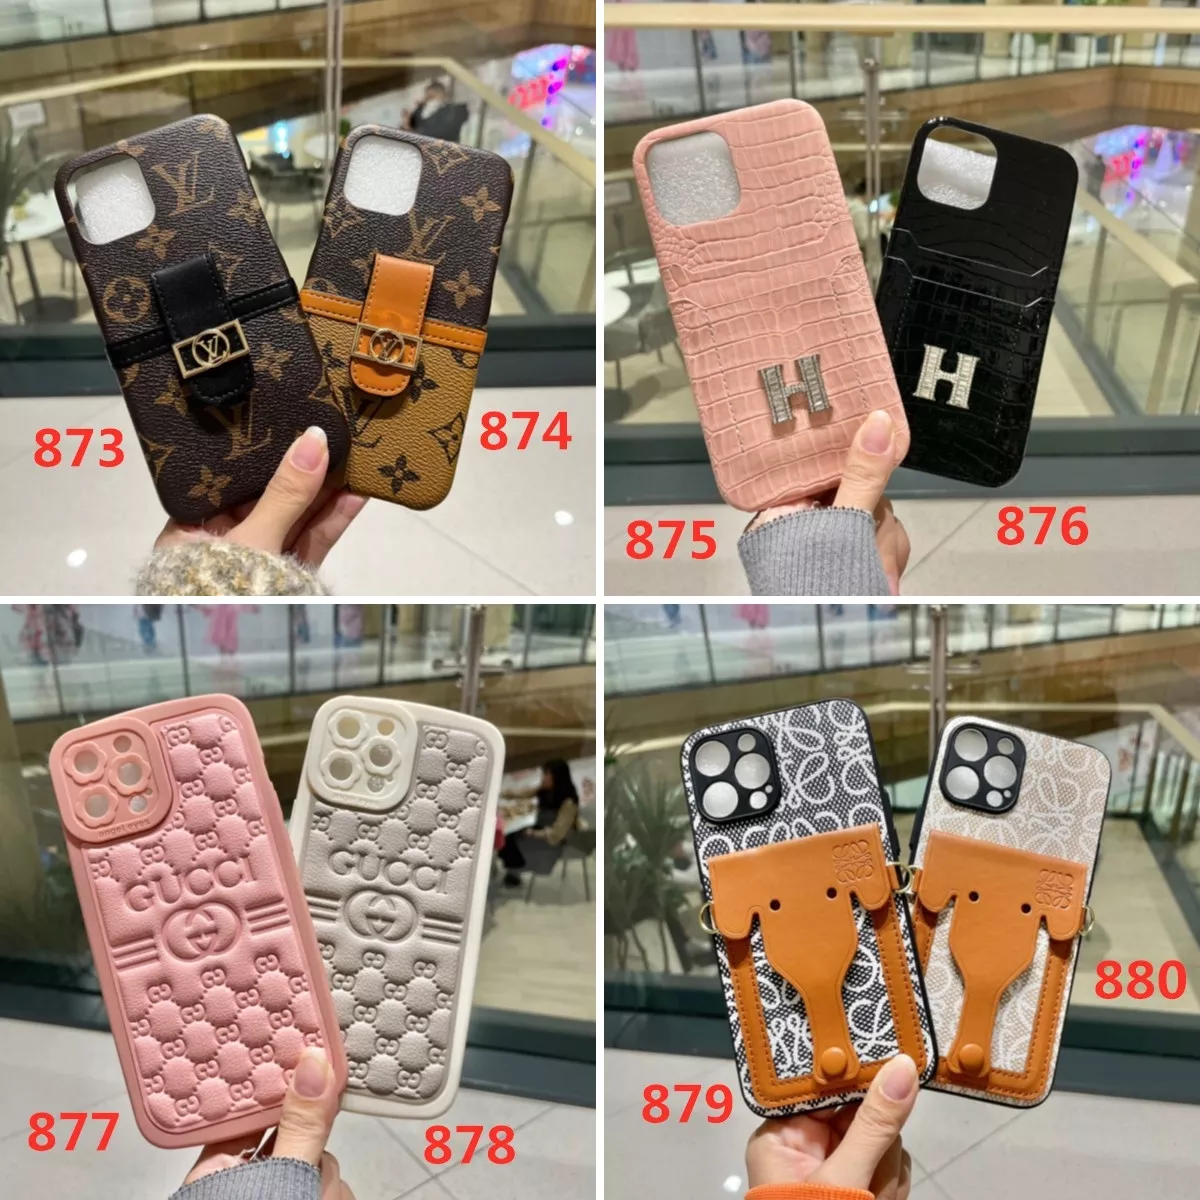 Final price reduction 】 LOUIS VUITTON popular, super beautiful cute iPhone  15 mobile phone cover case, Gallery posted by Norma